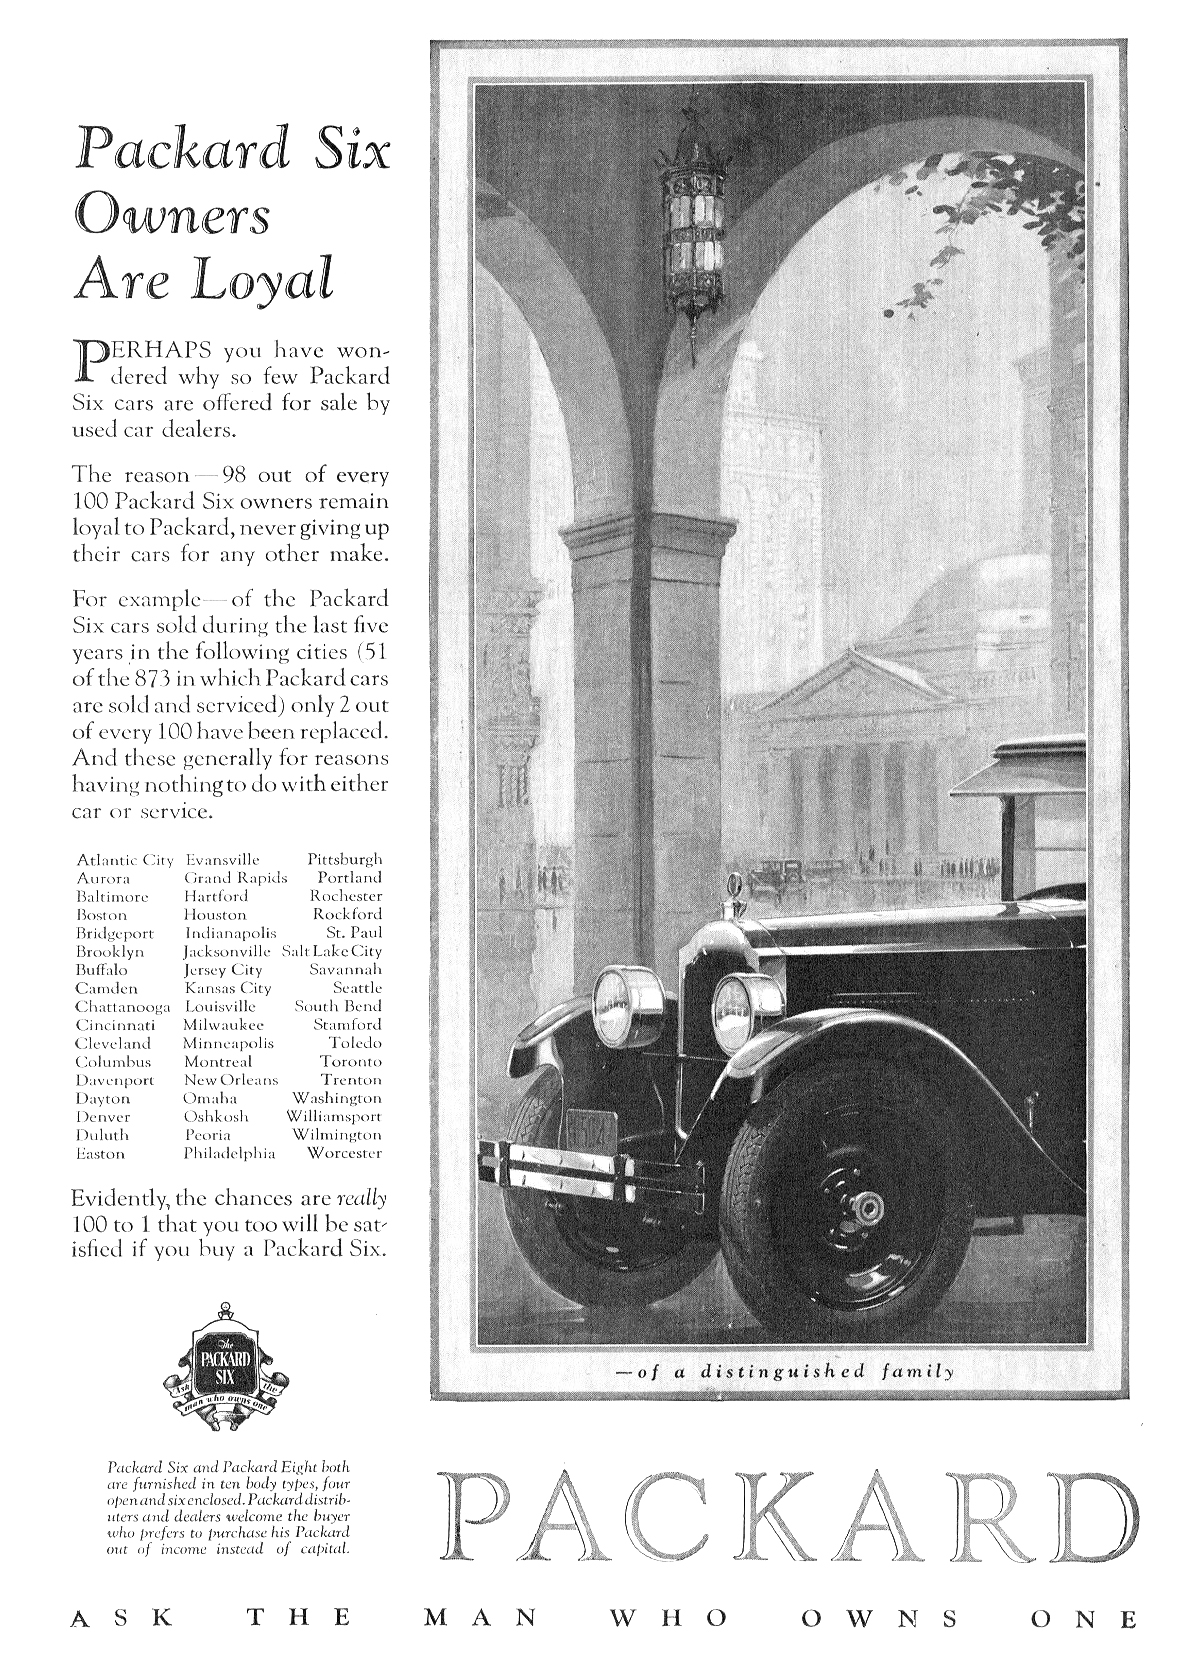 Packard Six Ad (October, 1925): Packard Six Owners Are Loyal